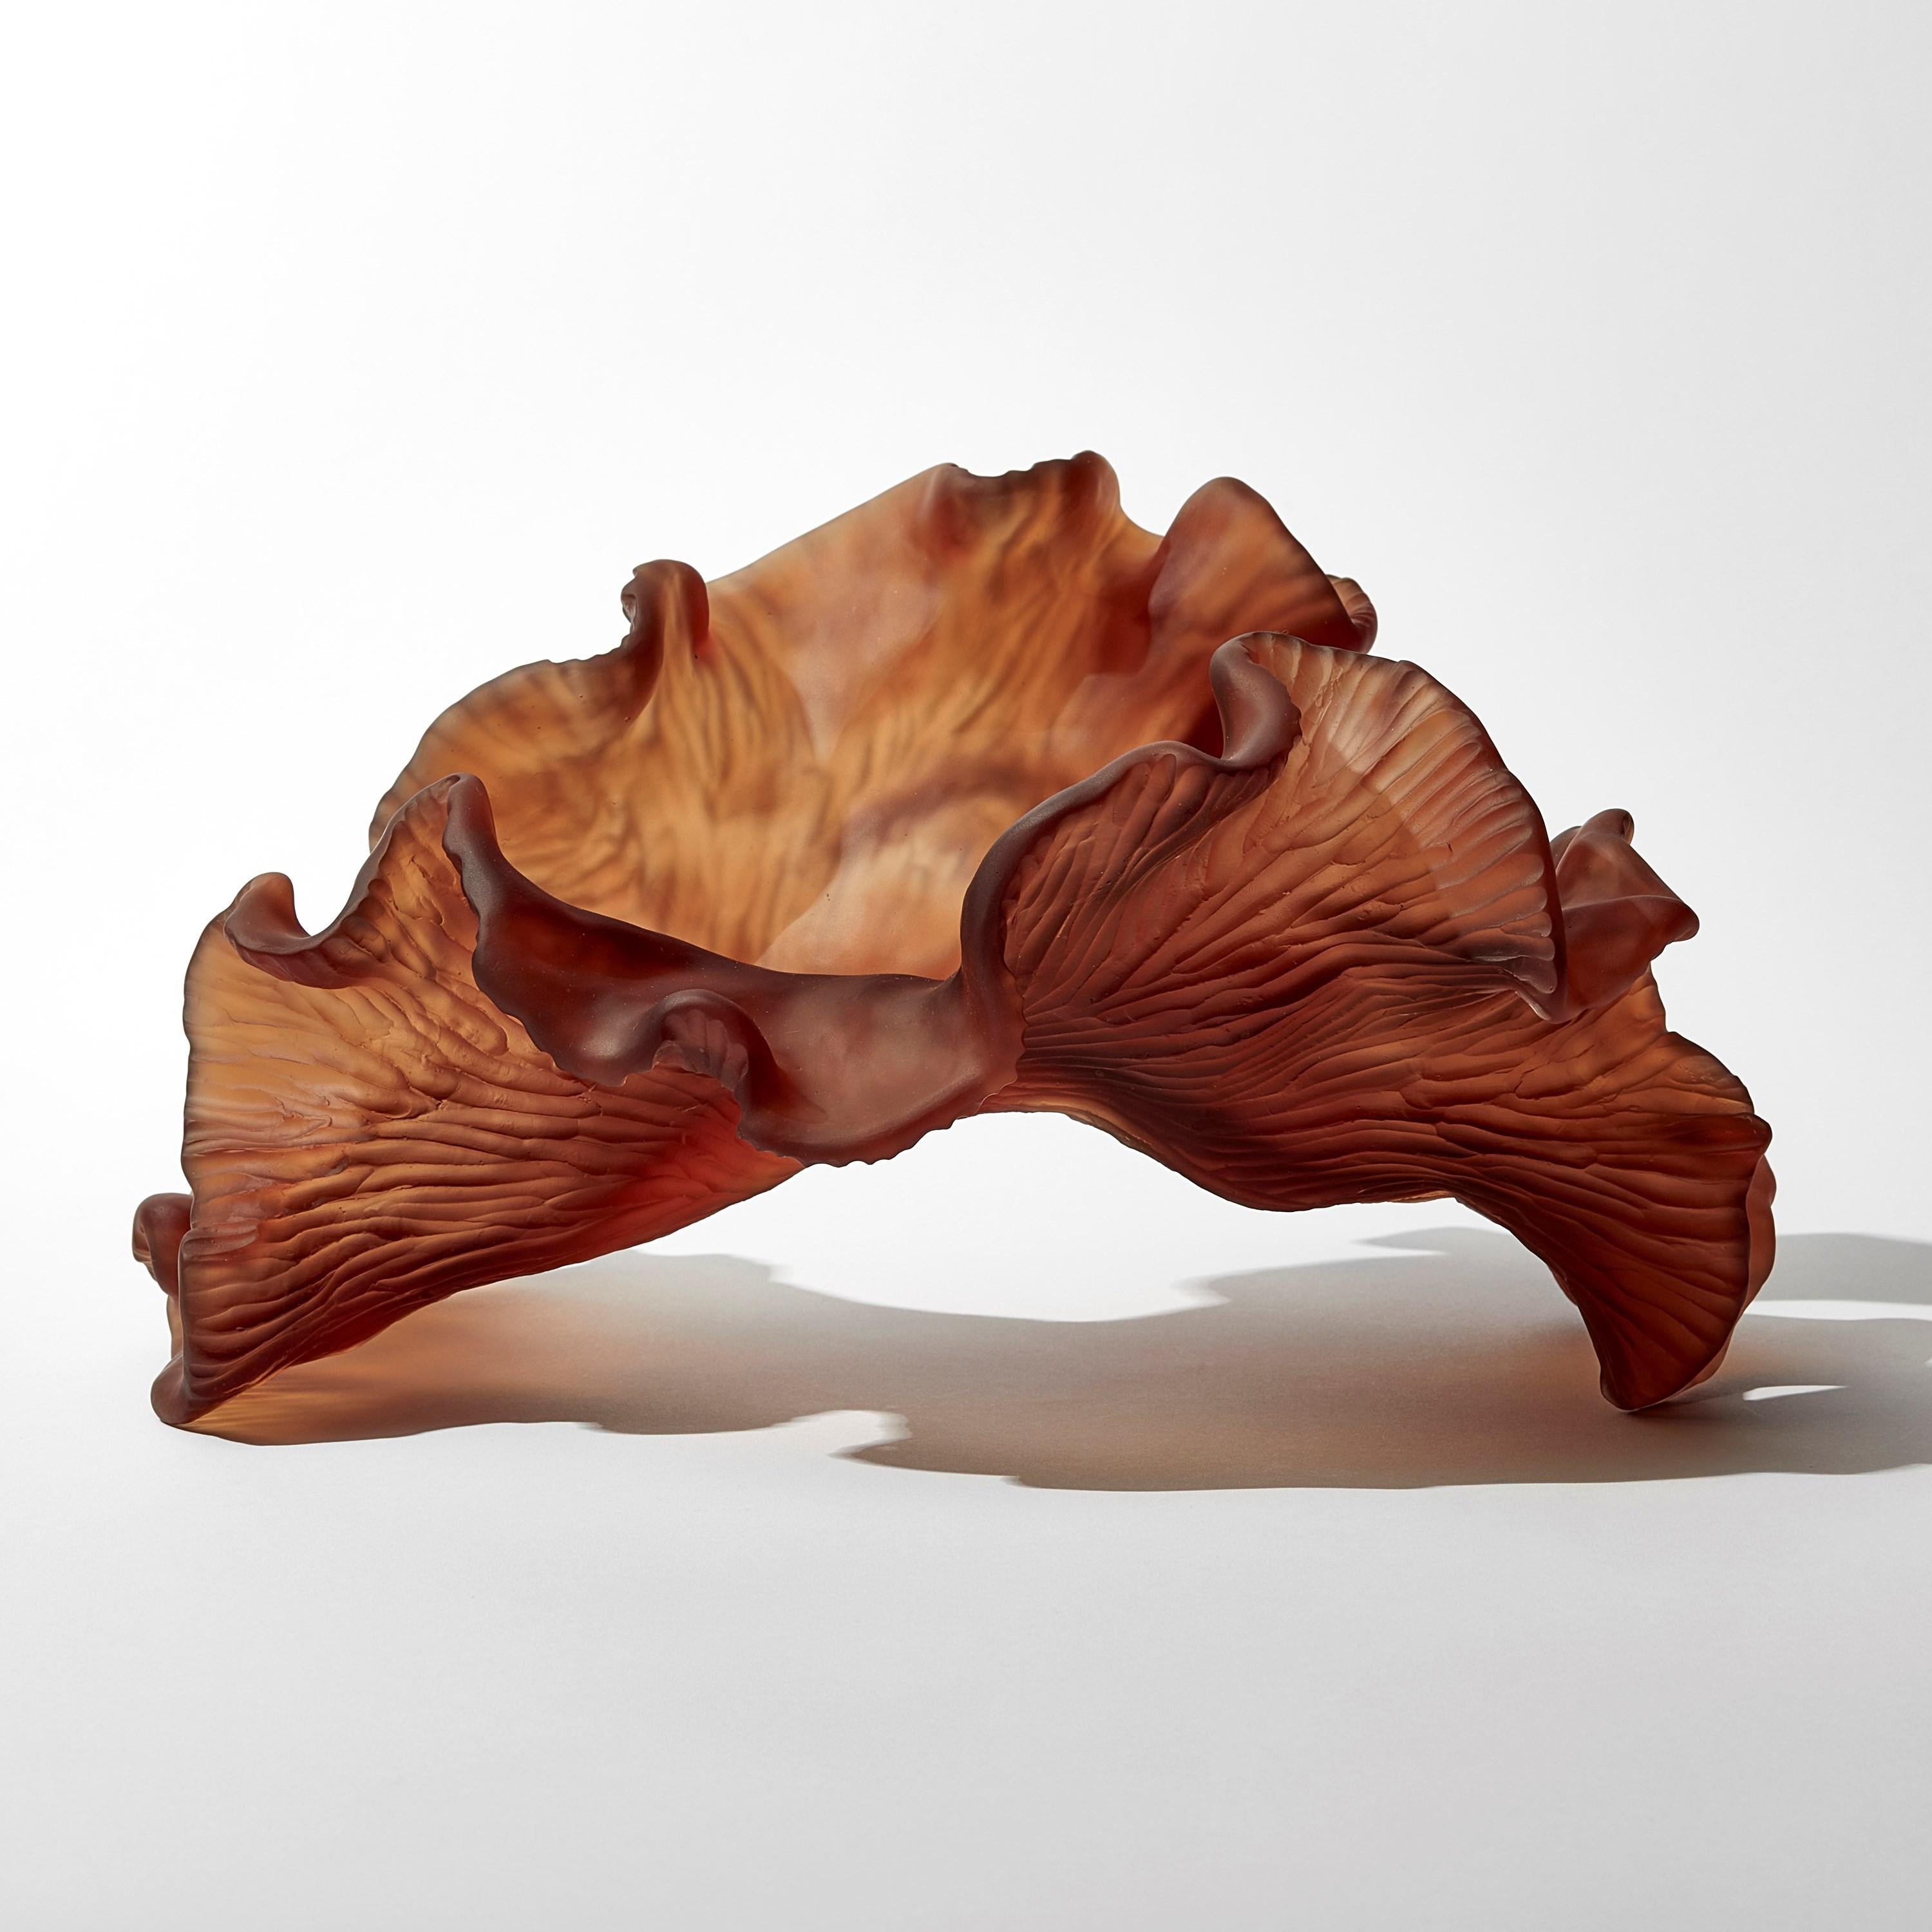 'Still Drift' is a unique cast glass sculpture by the Danish artist, Monette Larsen.

Larsen has always been fascinated by the concept of beauty within nature; what makes something beautiful and the characteristics that define it as such. Her work